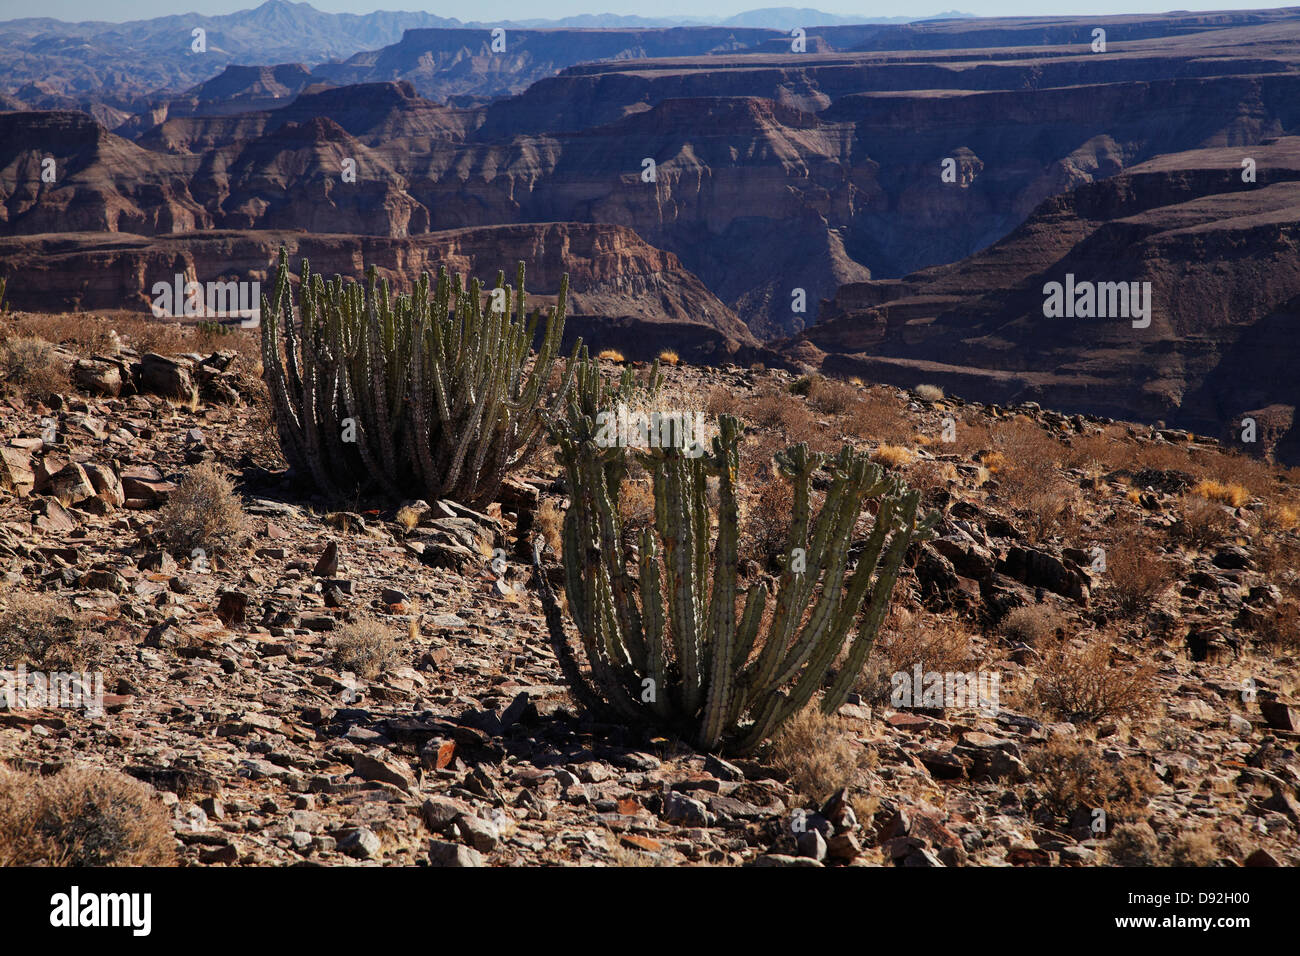 Cactus, il Fish River Canyon, Namibia del Sud Africa Foto Stock